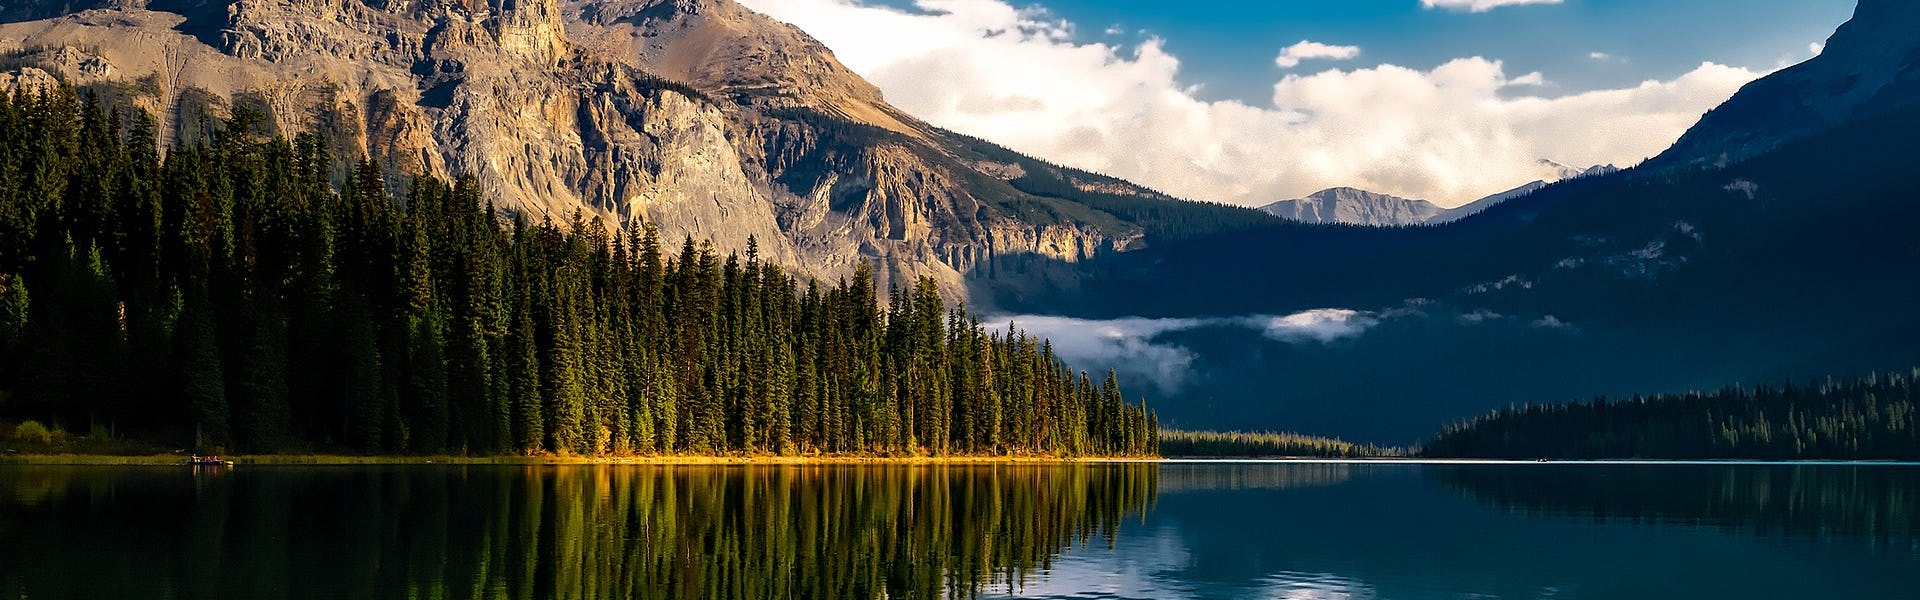 Lake with mountains in Western Canada